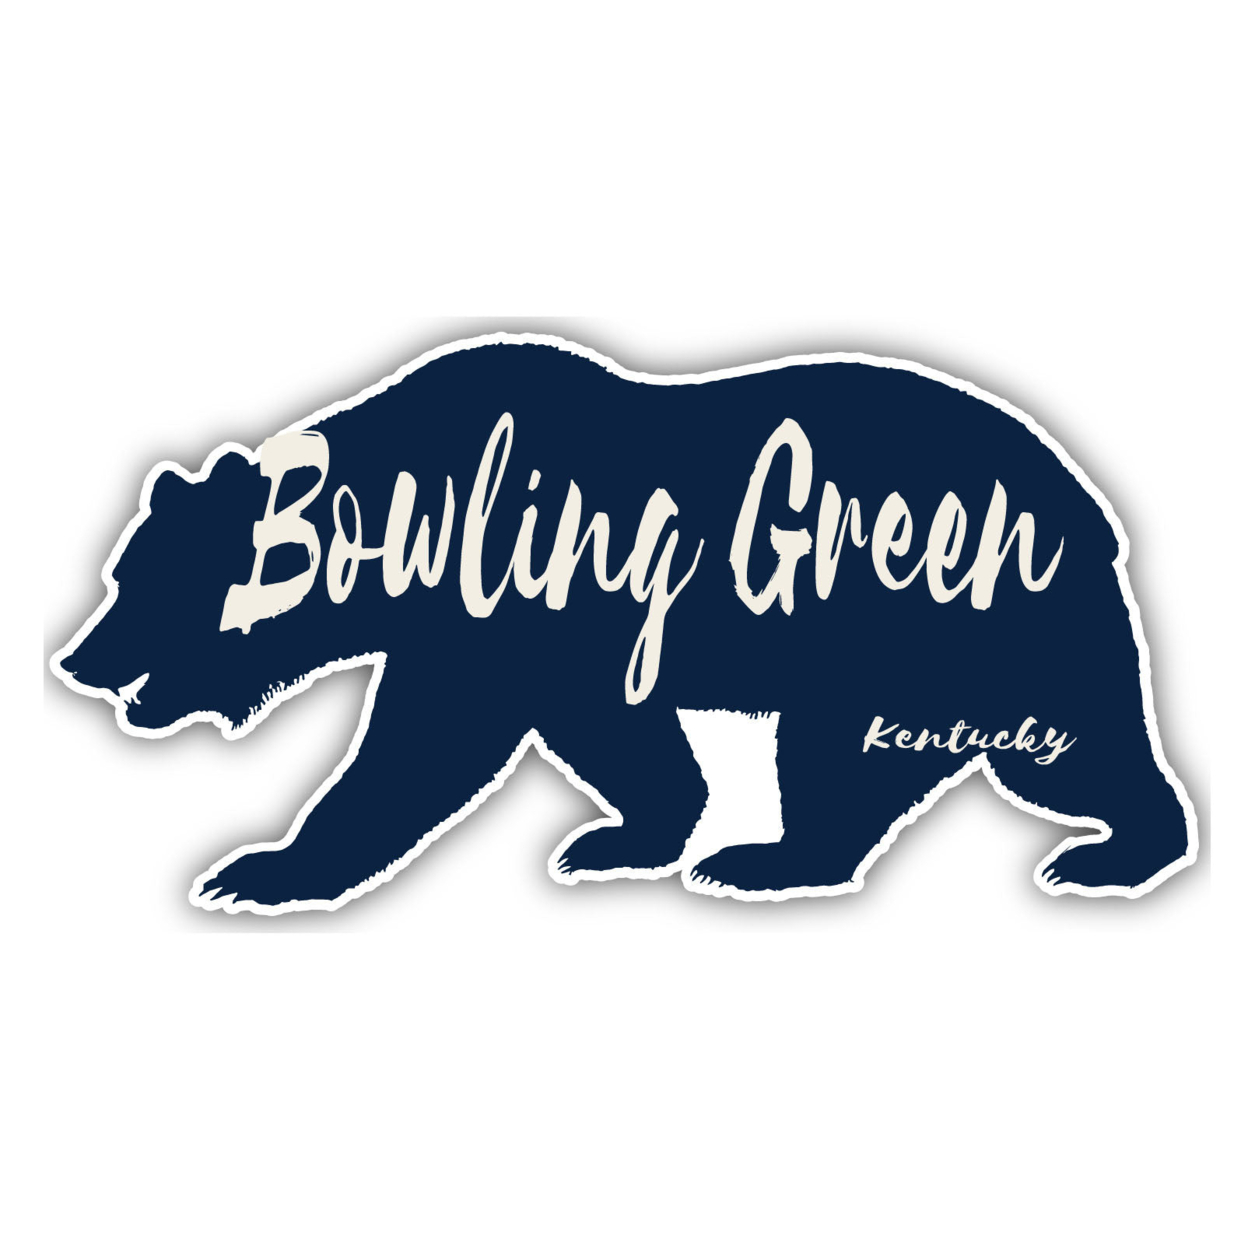 Bowling Green Kentucky Souvenir Decorative Stickers (Choose Theme And Size) - 4-Pack, 6-Inch, Bear